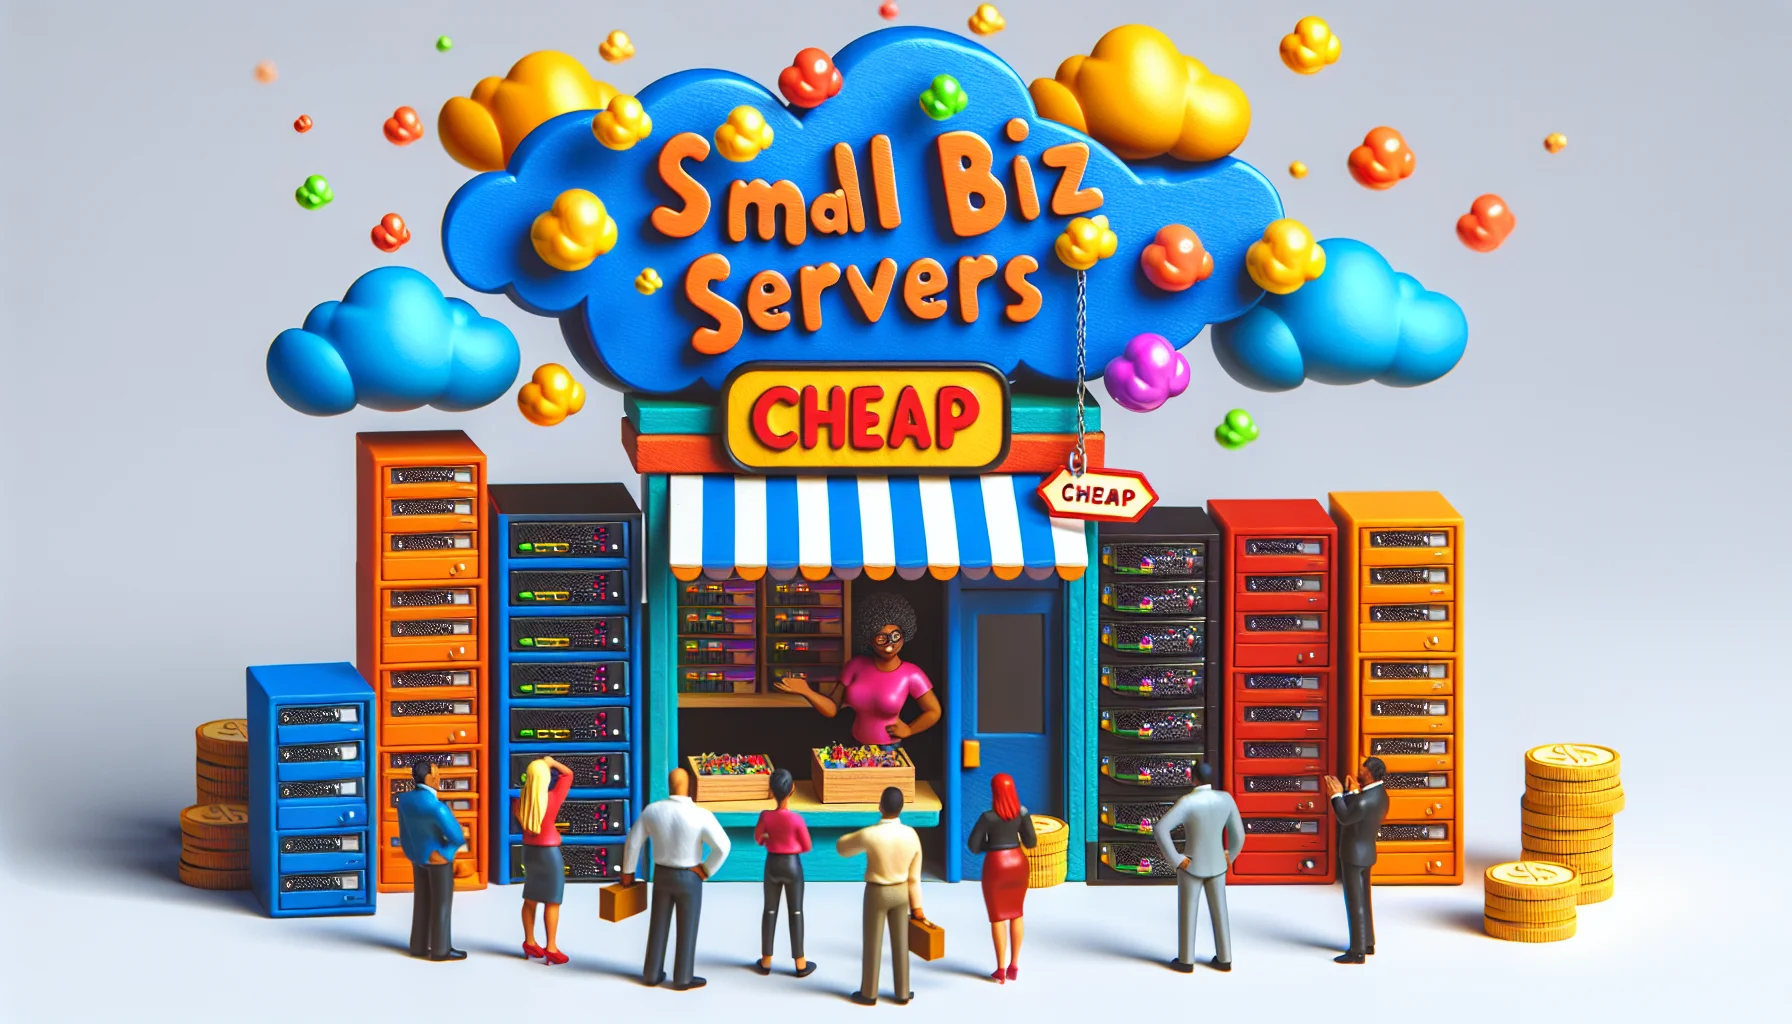 Create a humorous and enticing scene embodying the concept of affordable small business web hosting. Picture a tiny, vibrant storefront, humorously labeled as 'Small Biz Servers'. In the foreground, a Black female owner is enthusiastically presenting a bunch of colorful, miniature server racks to a group of intrigued potential customers of various descents. Floating above the scene are bubbly, cartoonish clouds representing data flowing effortlessly. On the side, a playful price tag marked 'cheap' underscores the affordability aspect.